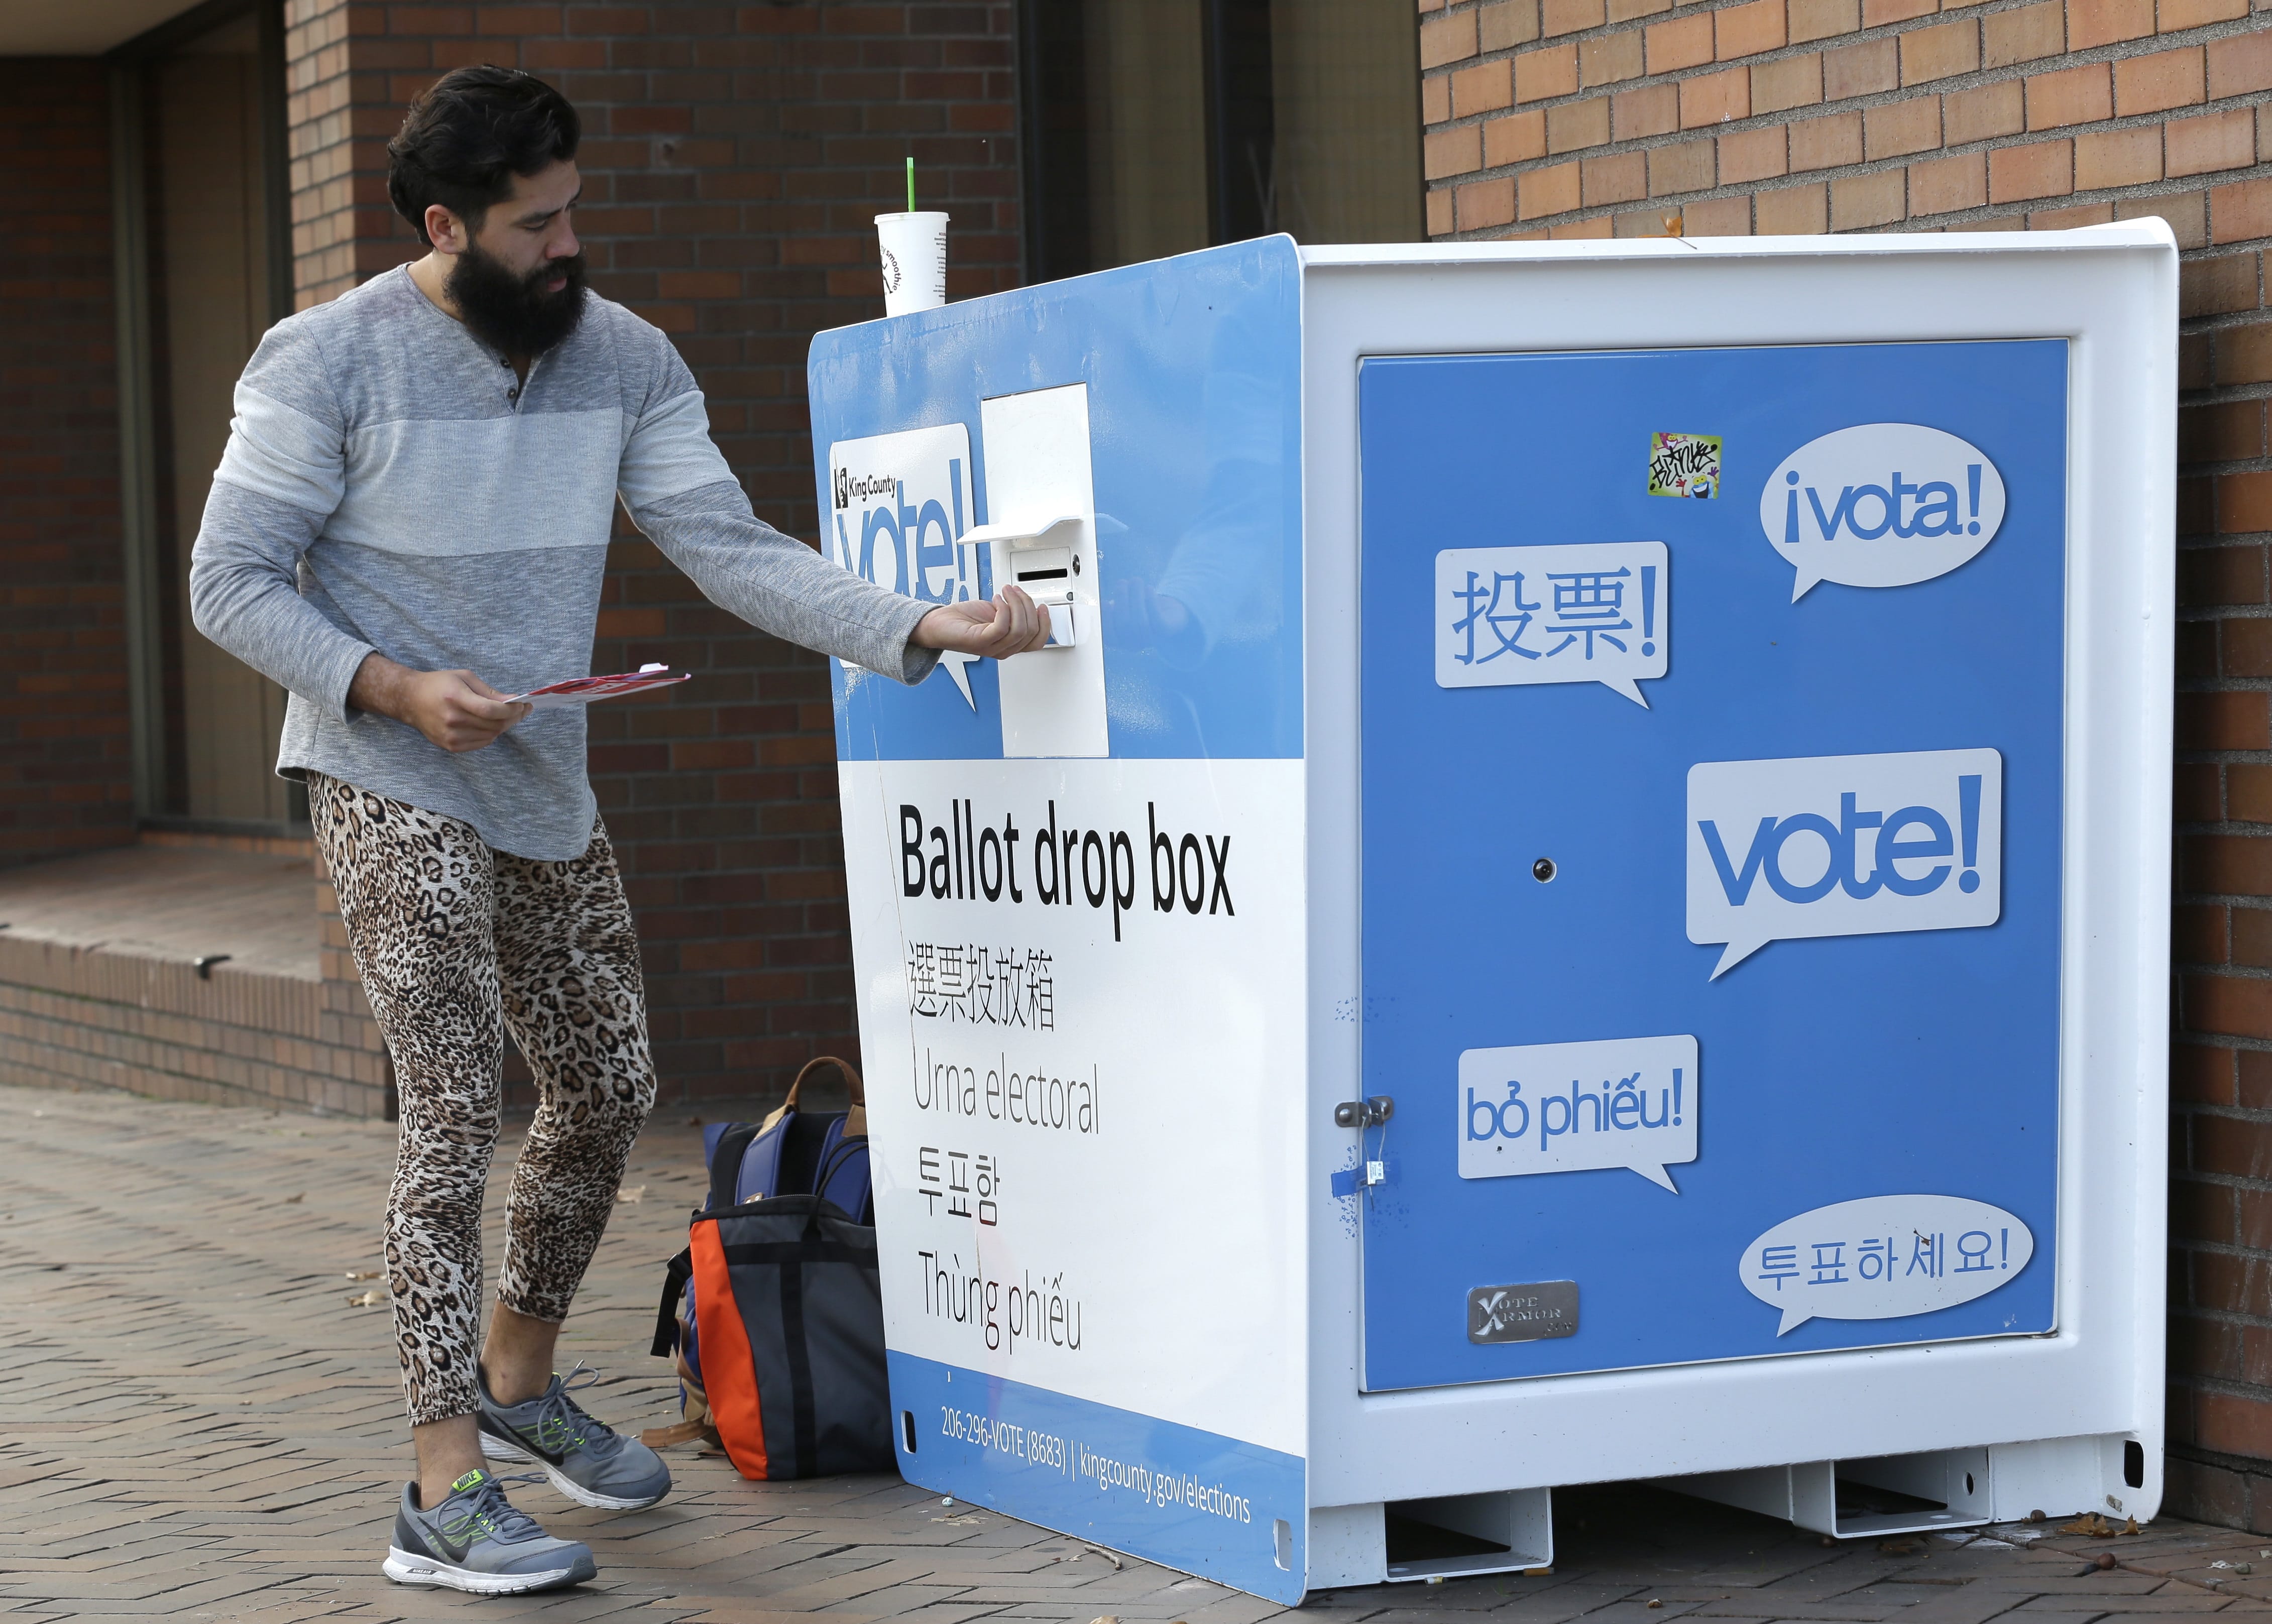 Jared Keirn deposits his vote-by-mail ballot in a collection box, Thursday, Nov. 3, 2016, at Seattle Central College in Seattle. More than a million Washingtonians have already cast their ballots in advance of Tuesday's election, as voters decide on federal and state races, as well as ballot initiatives. (AP Photo/Ted S.